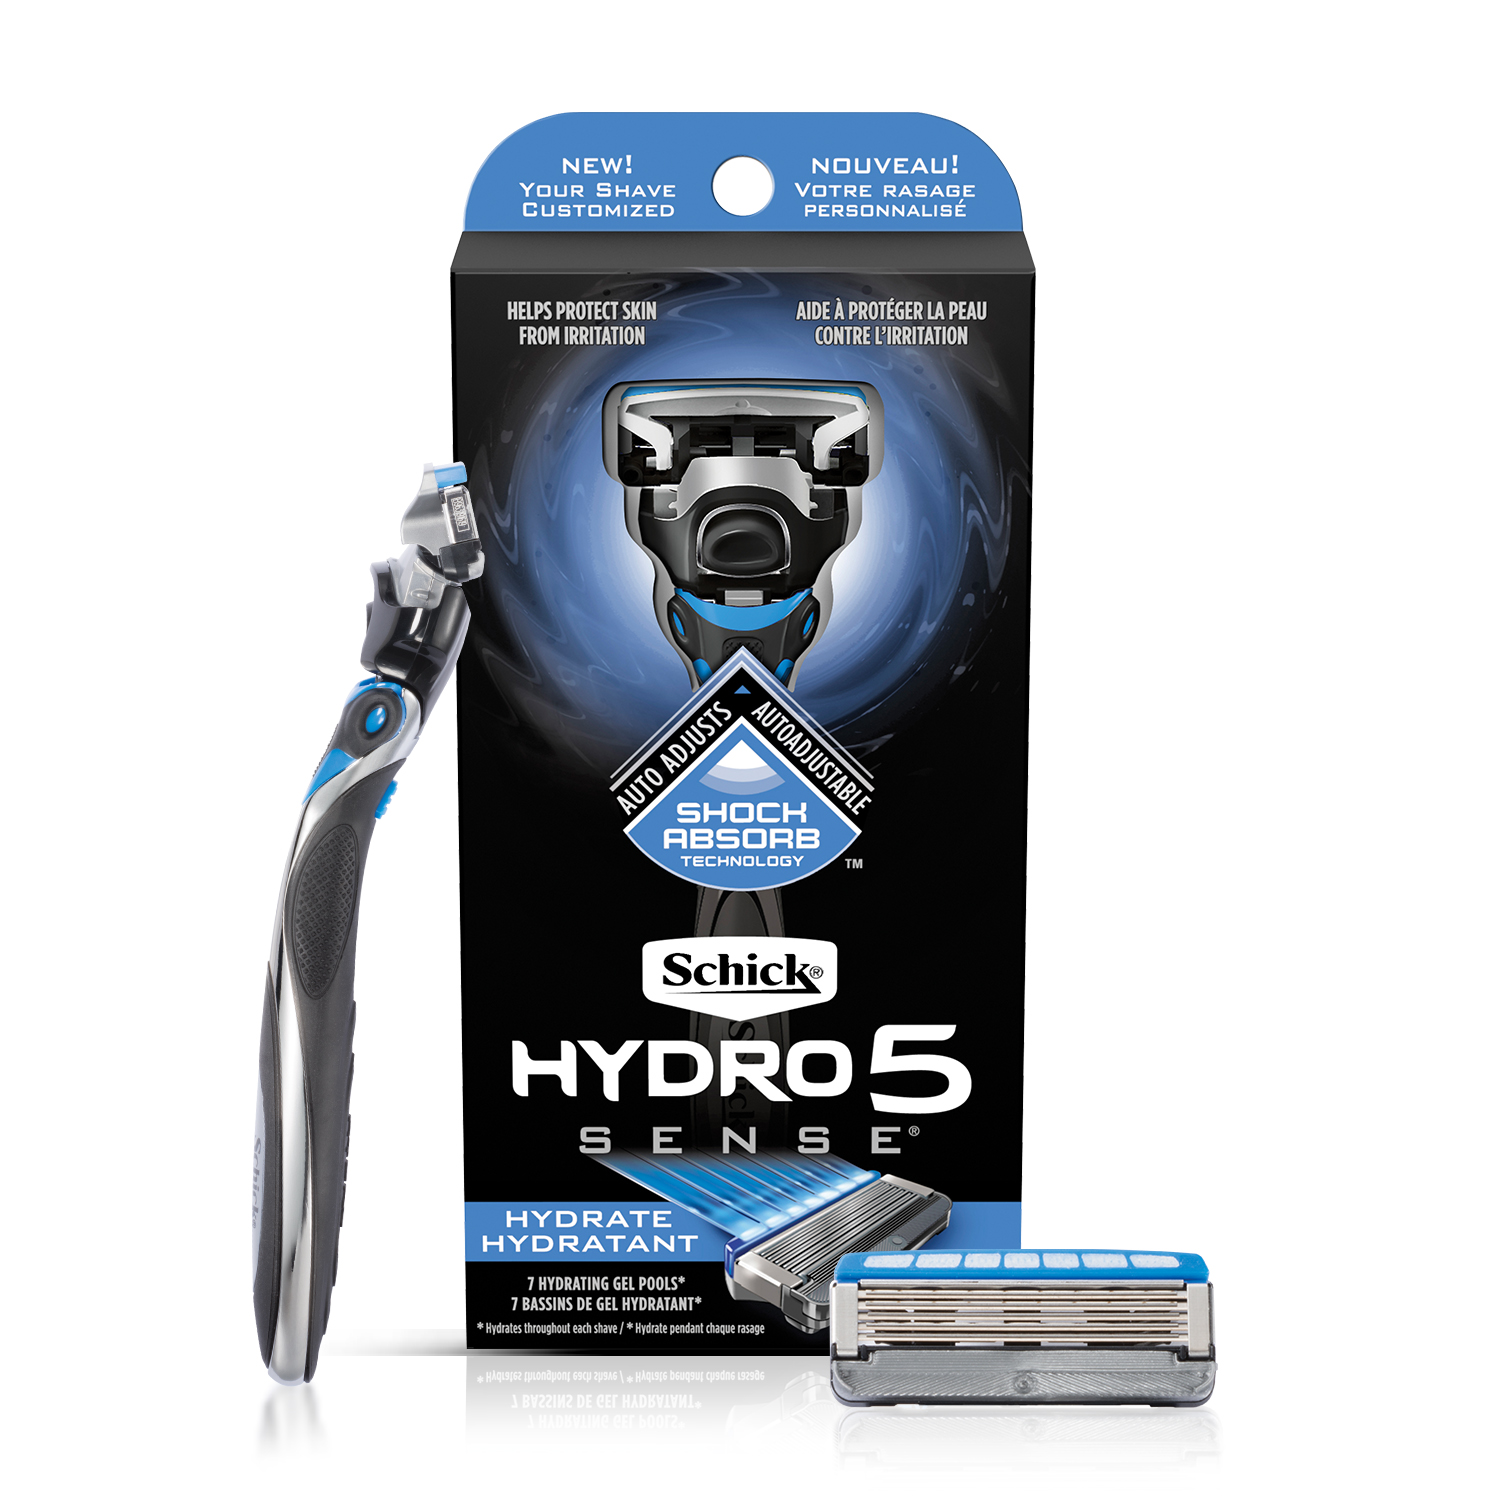 EPC_1226941_CP_MShave_Hydro5_Amazon_HYDRATEHYDRATE_contents.jpg